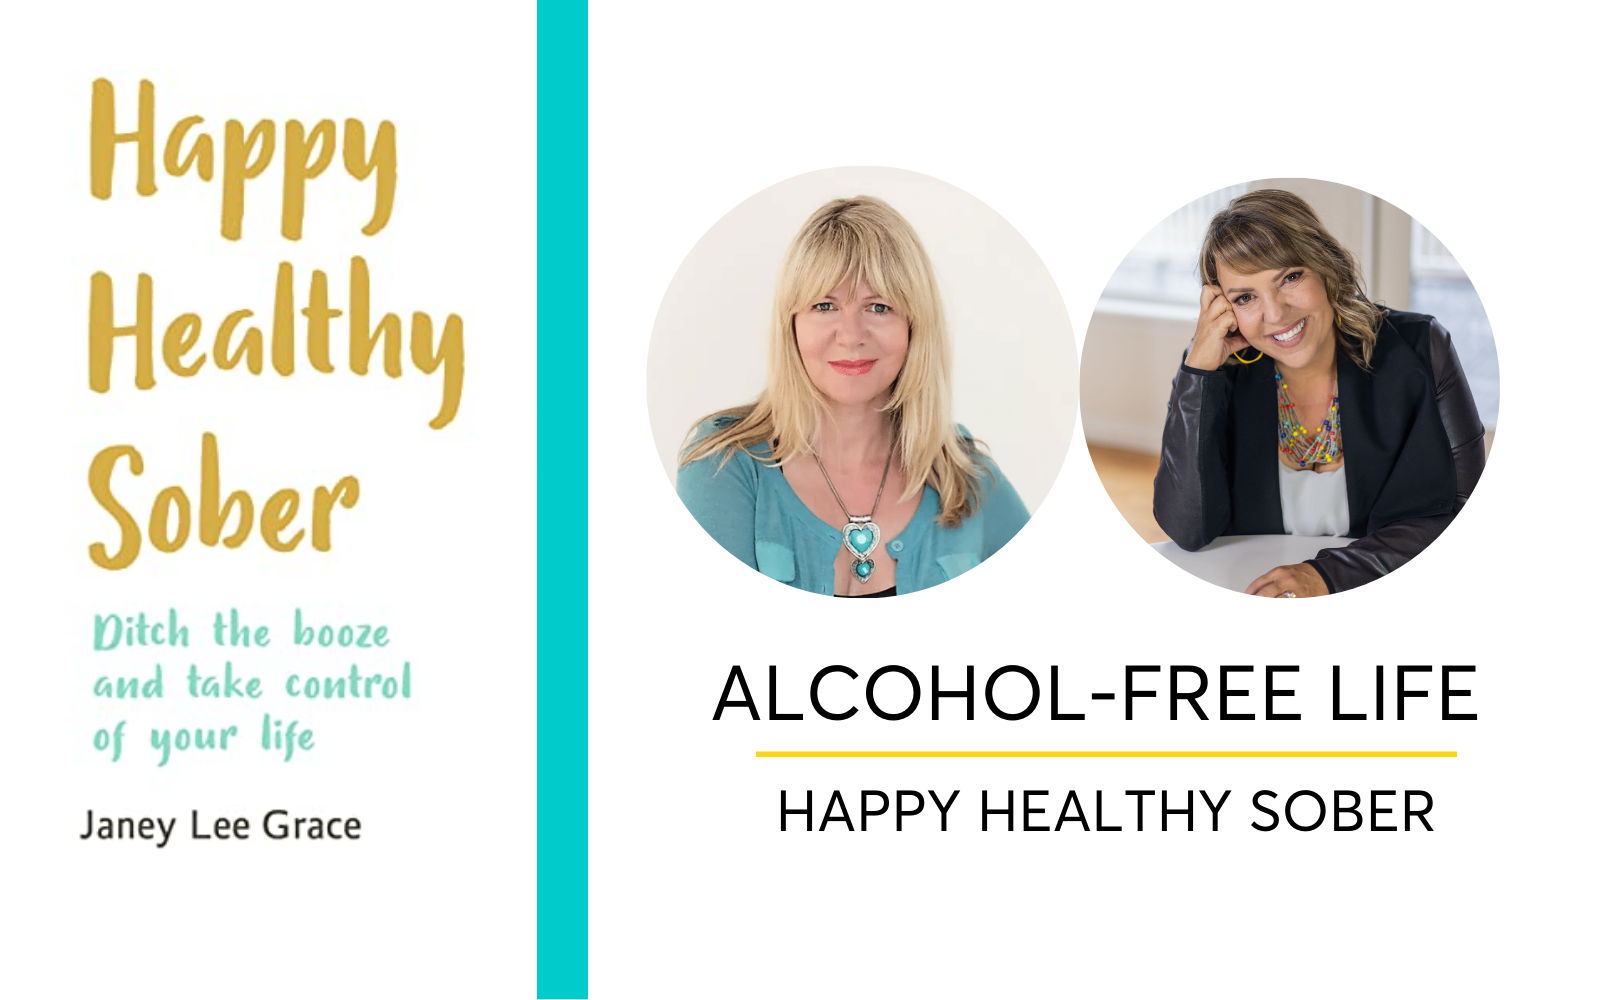 Alcohol-Free Life: How To Live Happy, Healthy And Sober